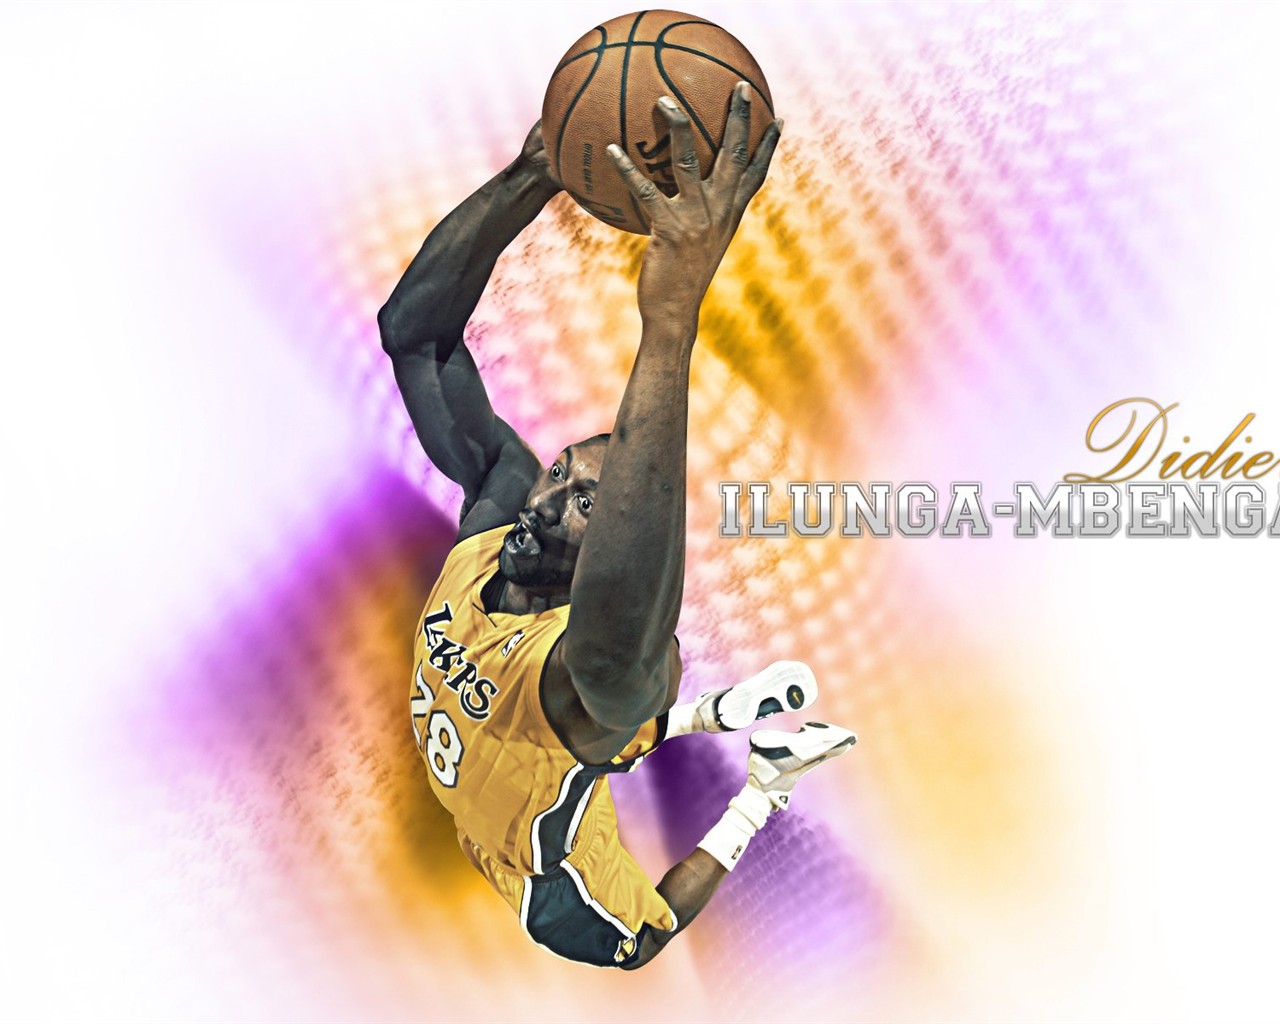 Los Angeles Lakers Wallpaper Oficial #9 - 1280x1024